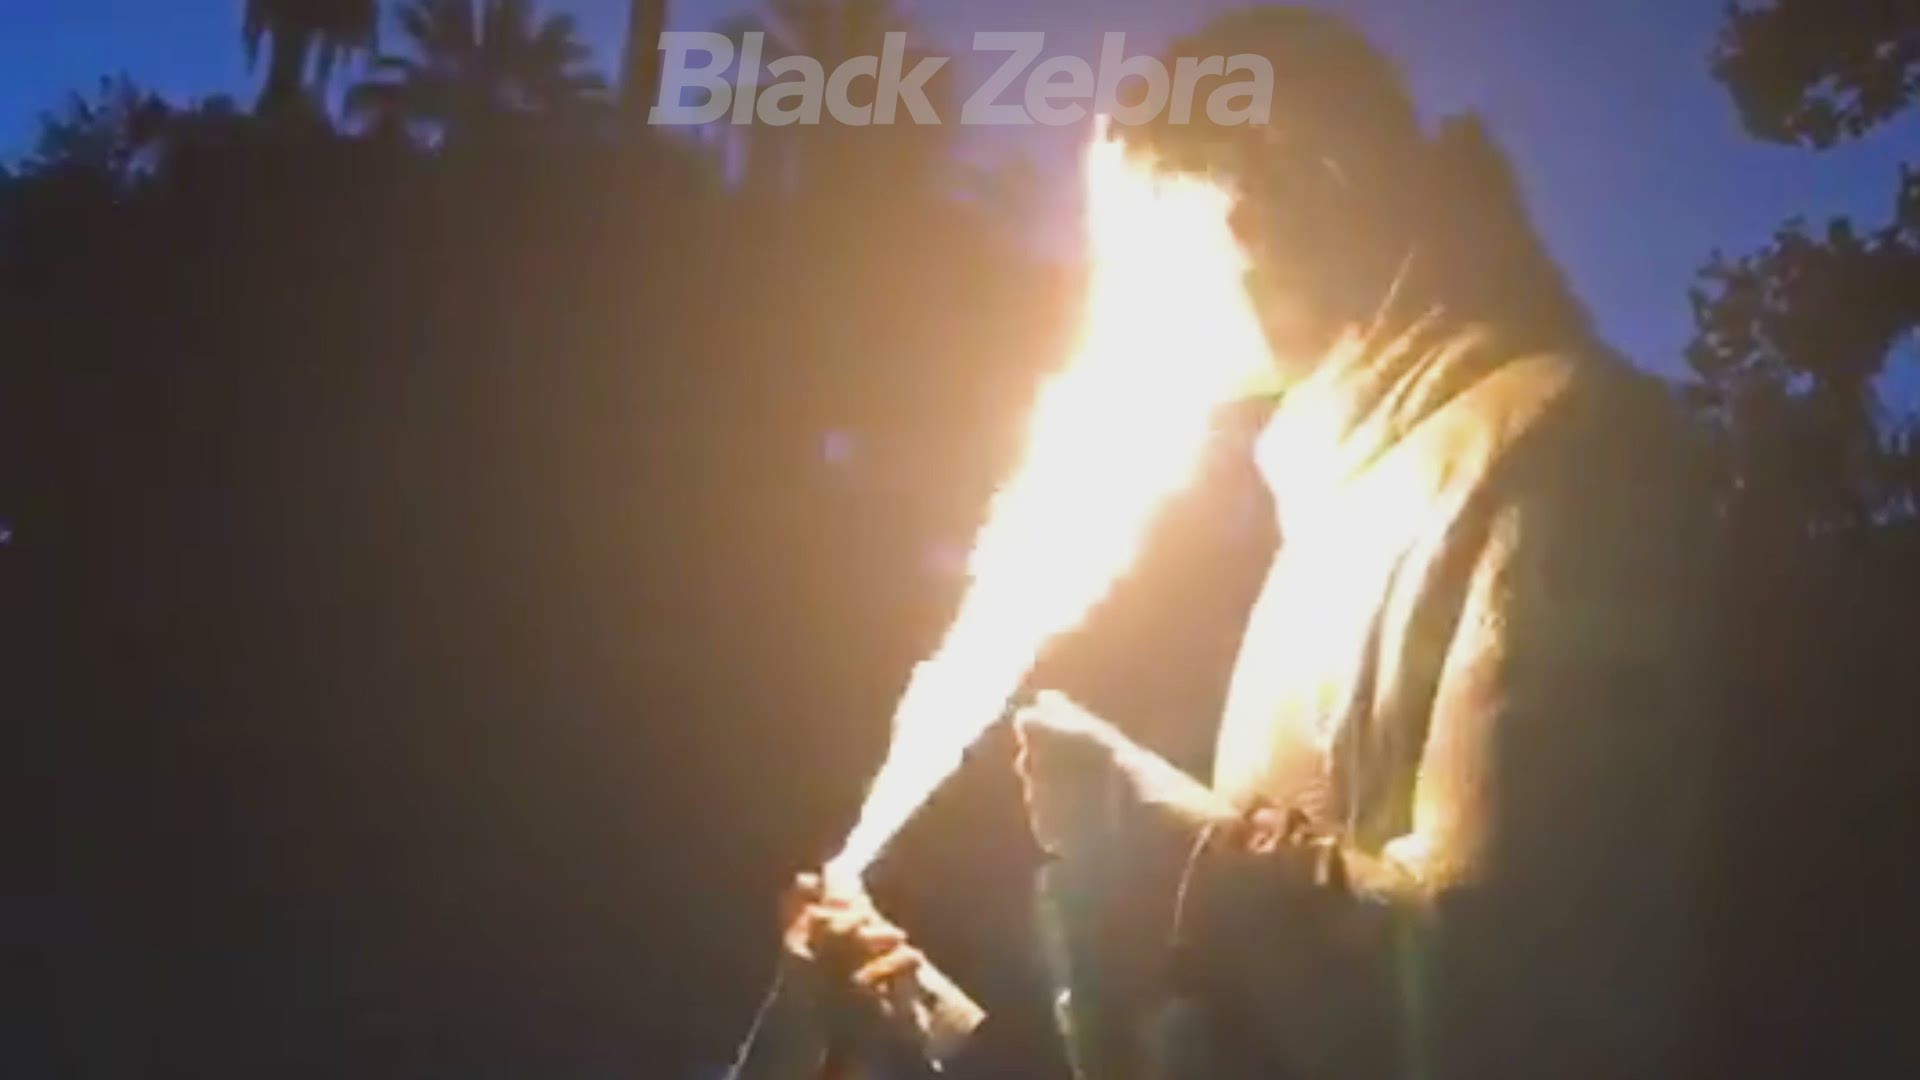 California Highway Patrol said protesters tore down a statue of Junipero Serra on July 4th. Video credit: Black Zebra Productions